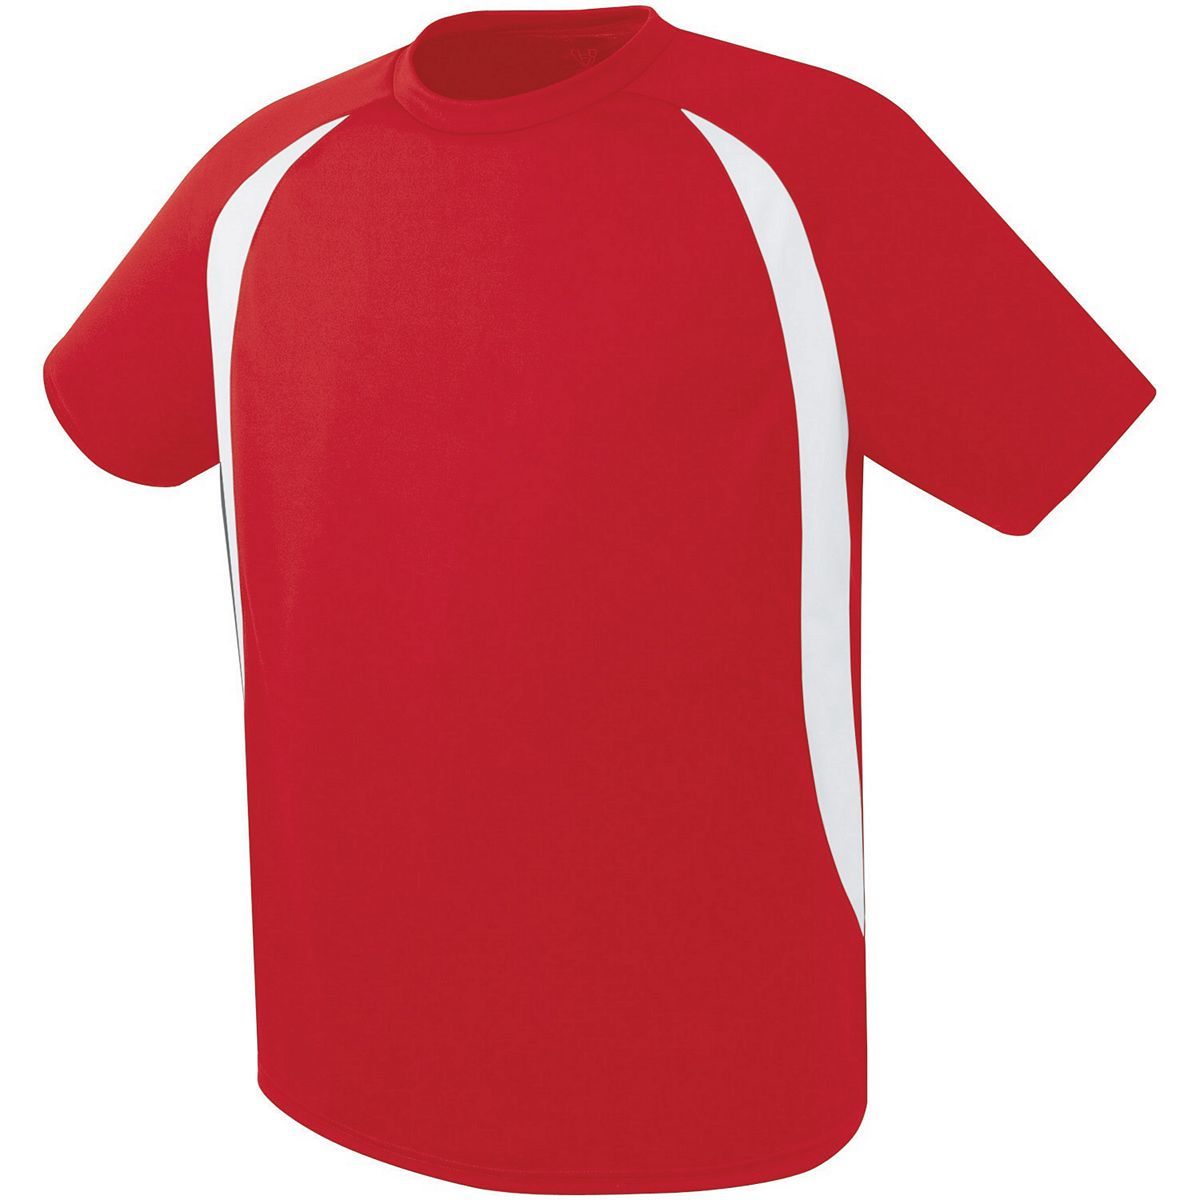 High 5 Liberty  Soccer Jersey in Scarlet/White  -Part of the Adult, Adult-Jersey, High5-Products, Soccer, Shirts, All-Sports-1 product lines at KanaleyCreations.com